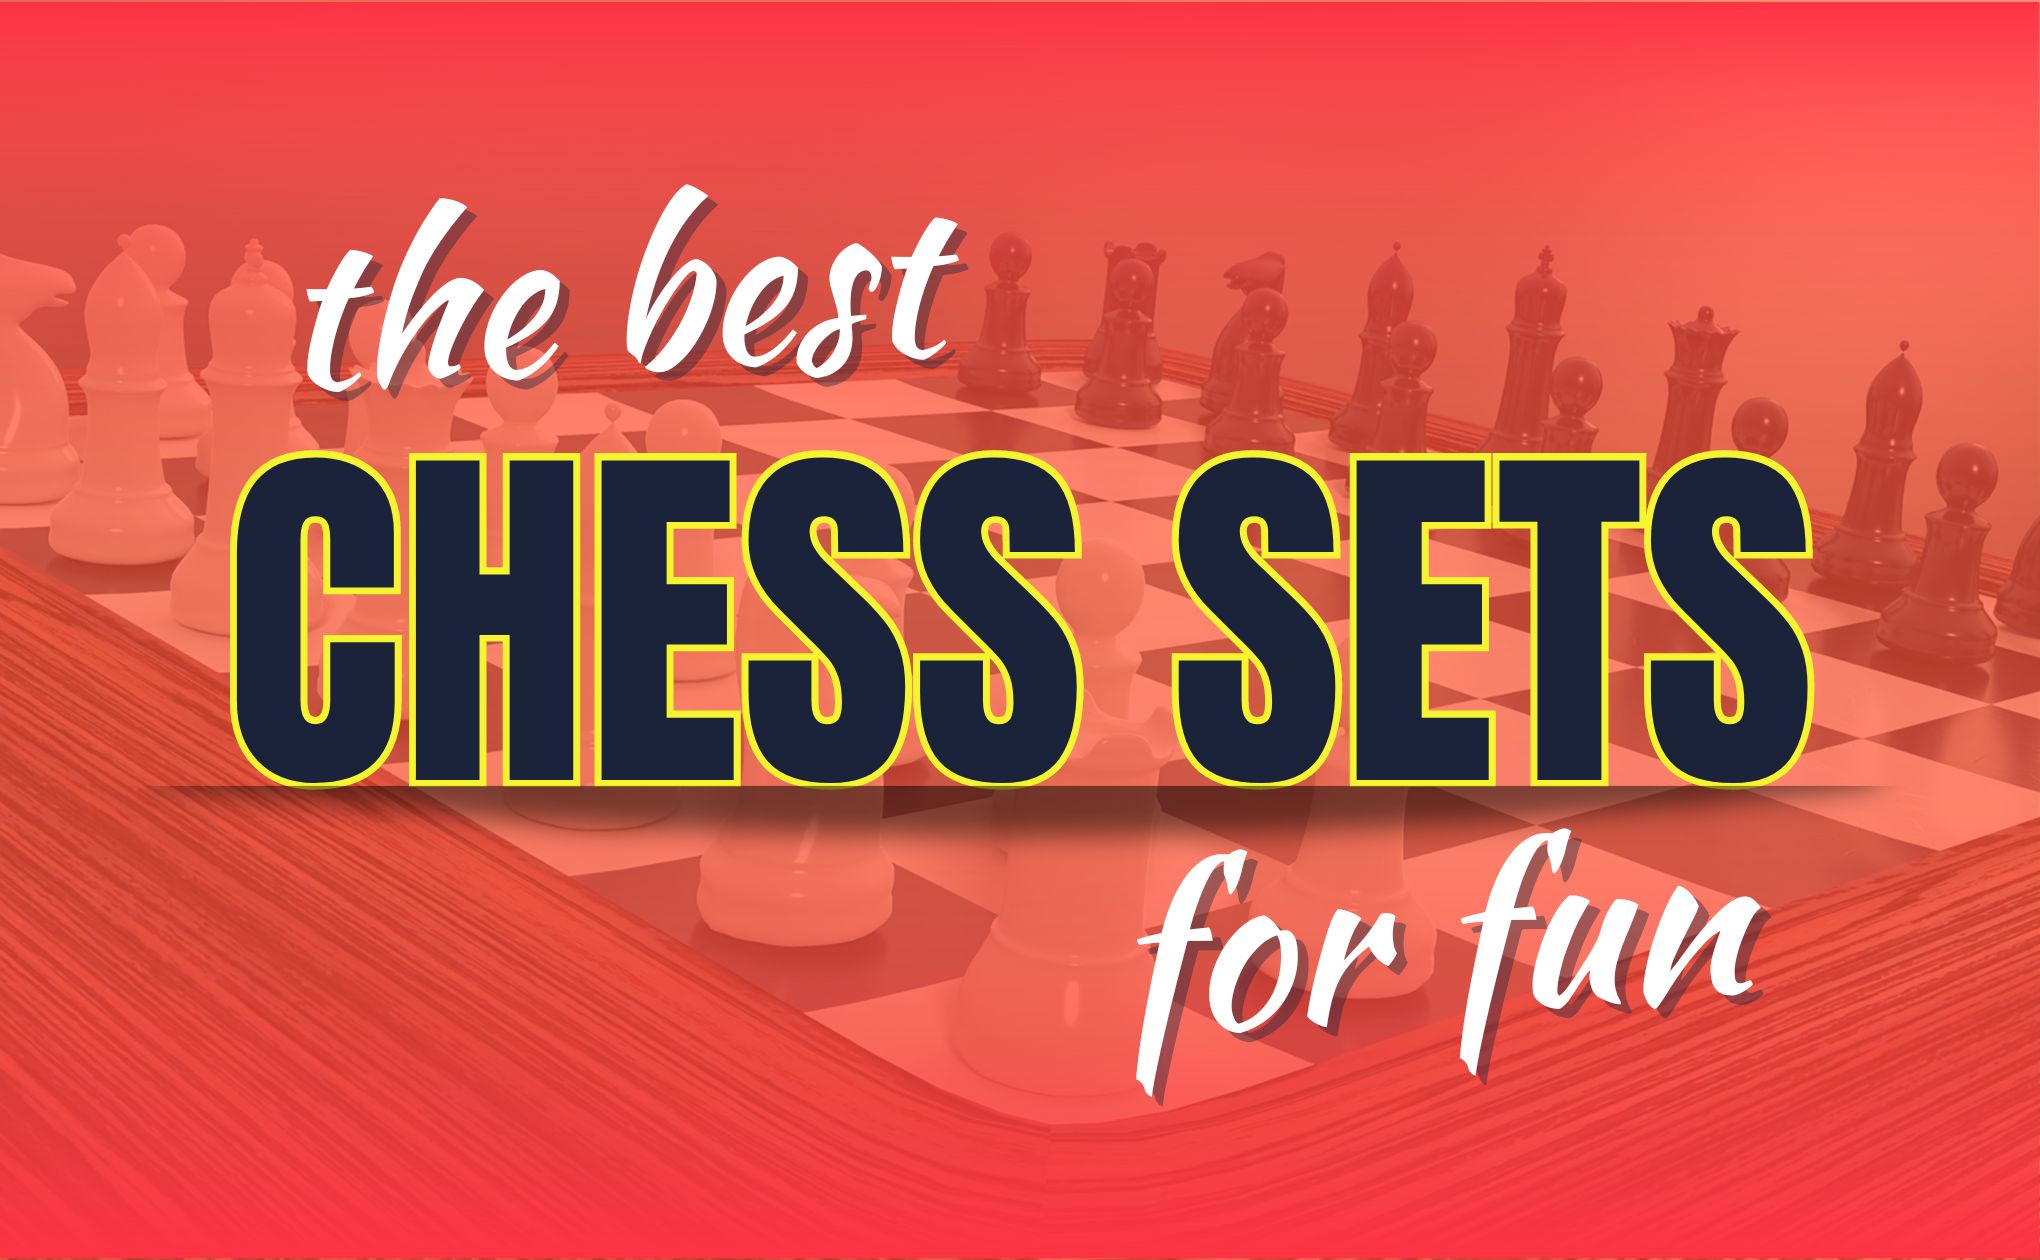 The Best Chess Sets For Fun